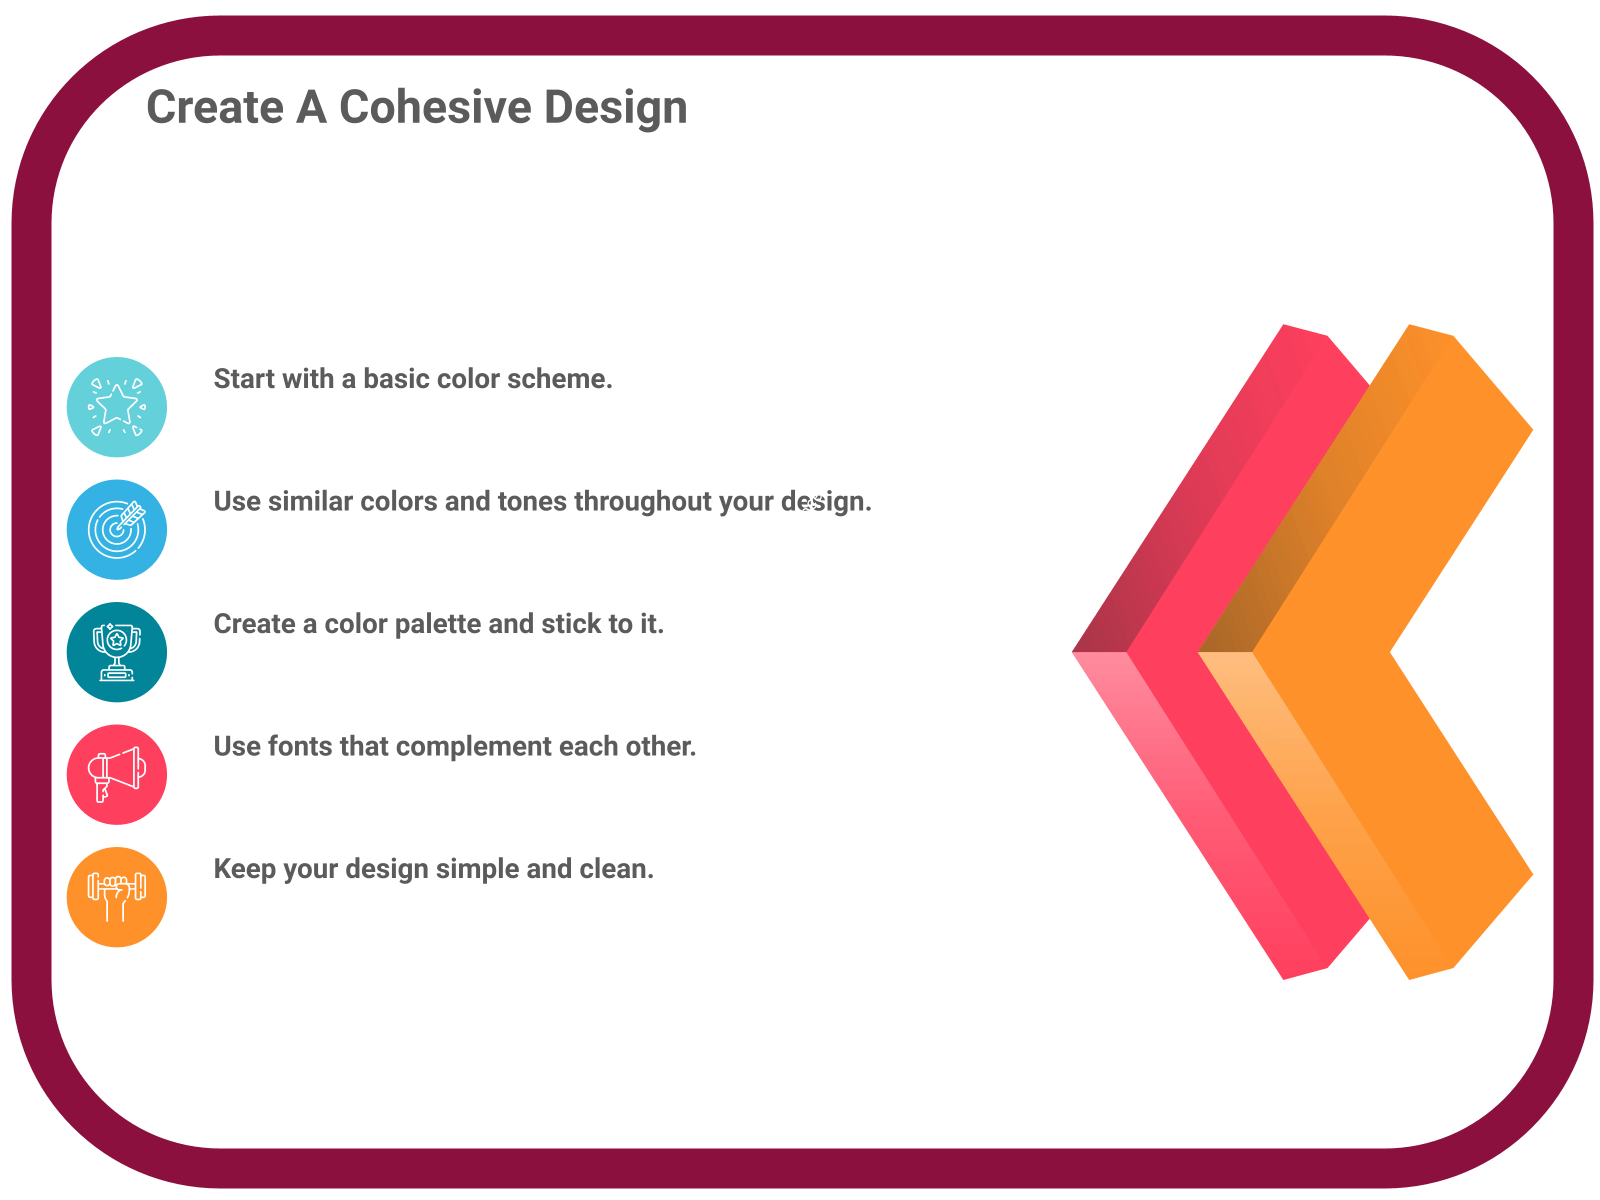 INFOGRAPHIC: Create a cohesive design - Poll the People